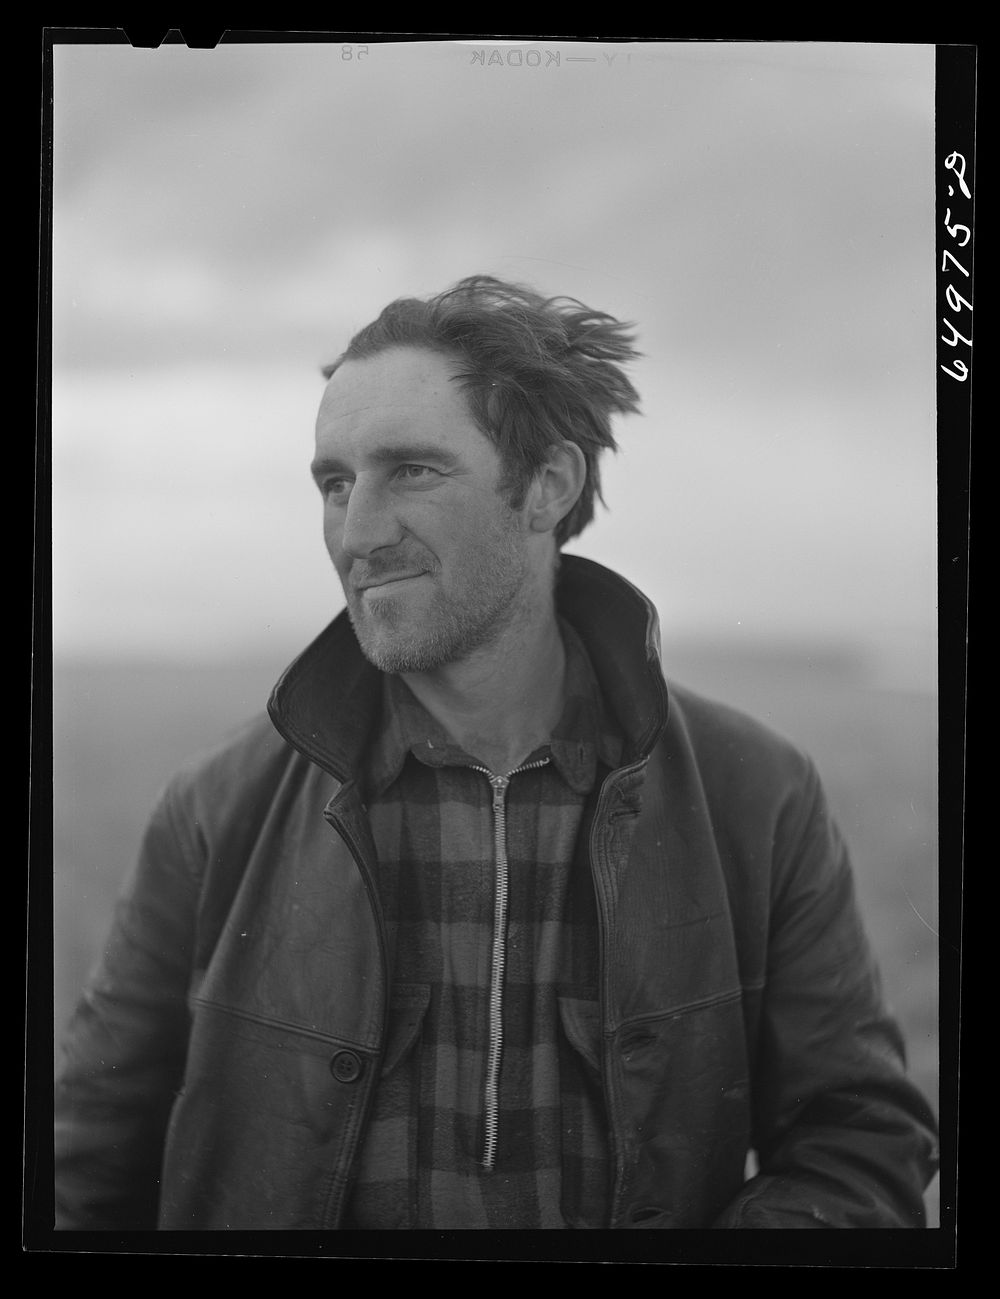 [Untitled photo, possibly related to: Garfield County, Montana. Sheepherder]. Sourced from the Library of Congress.